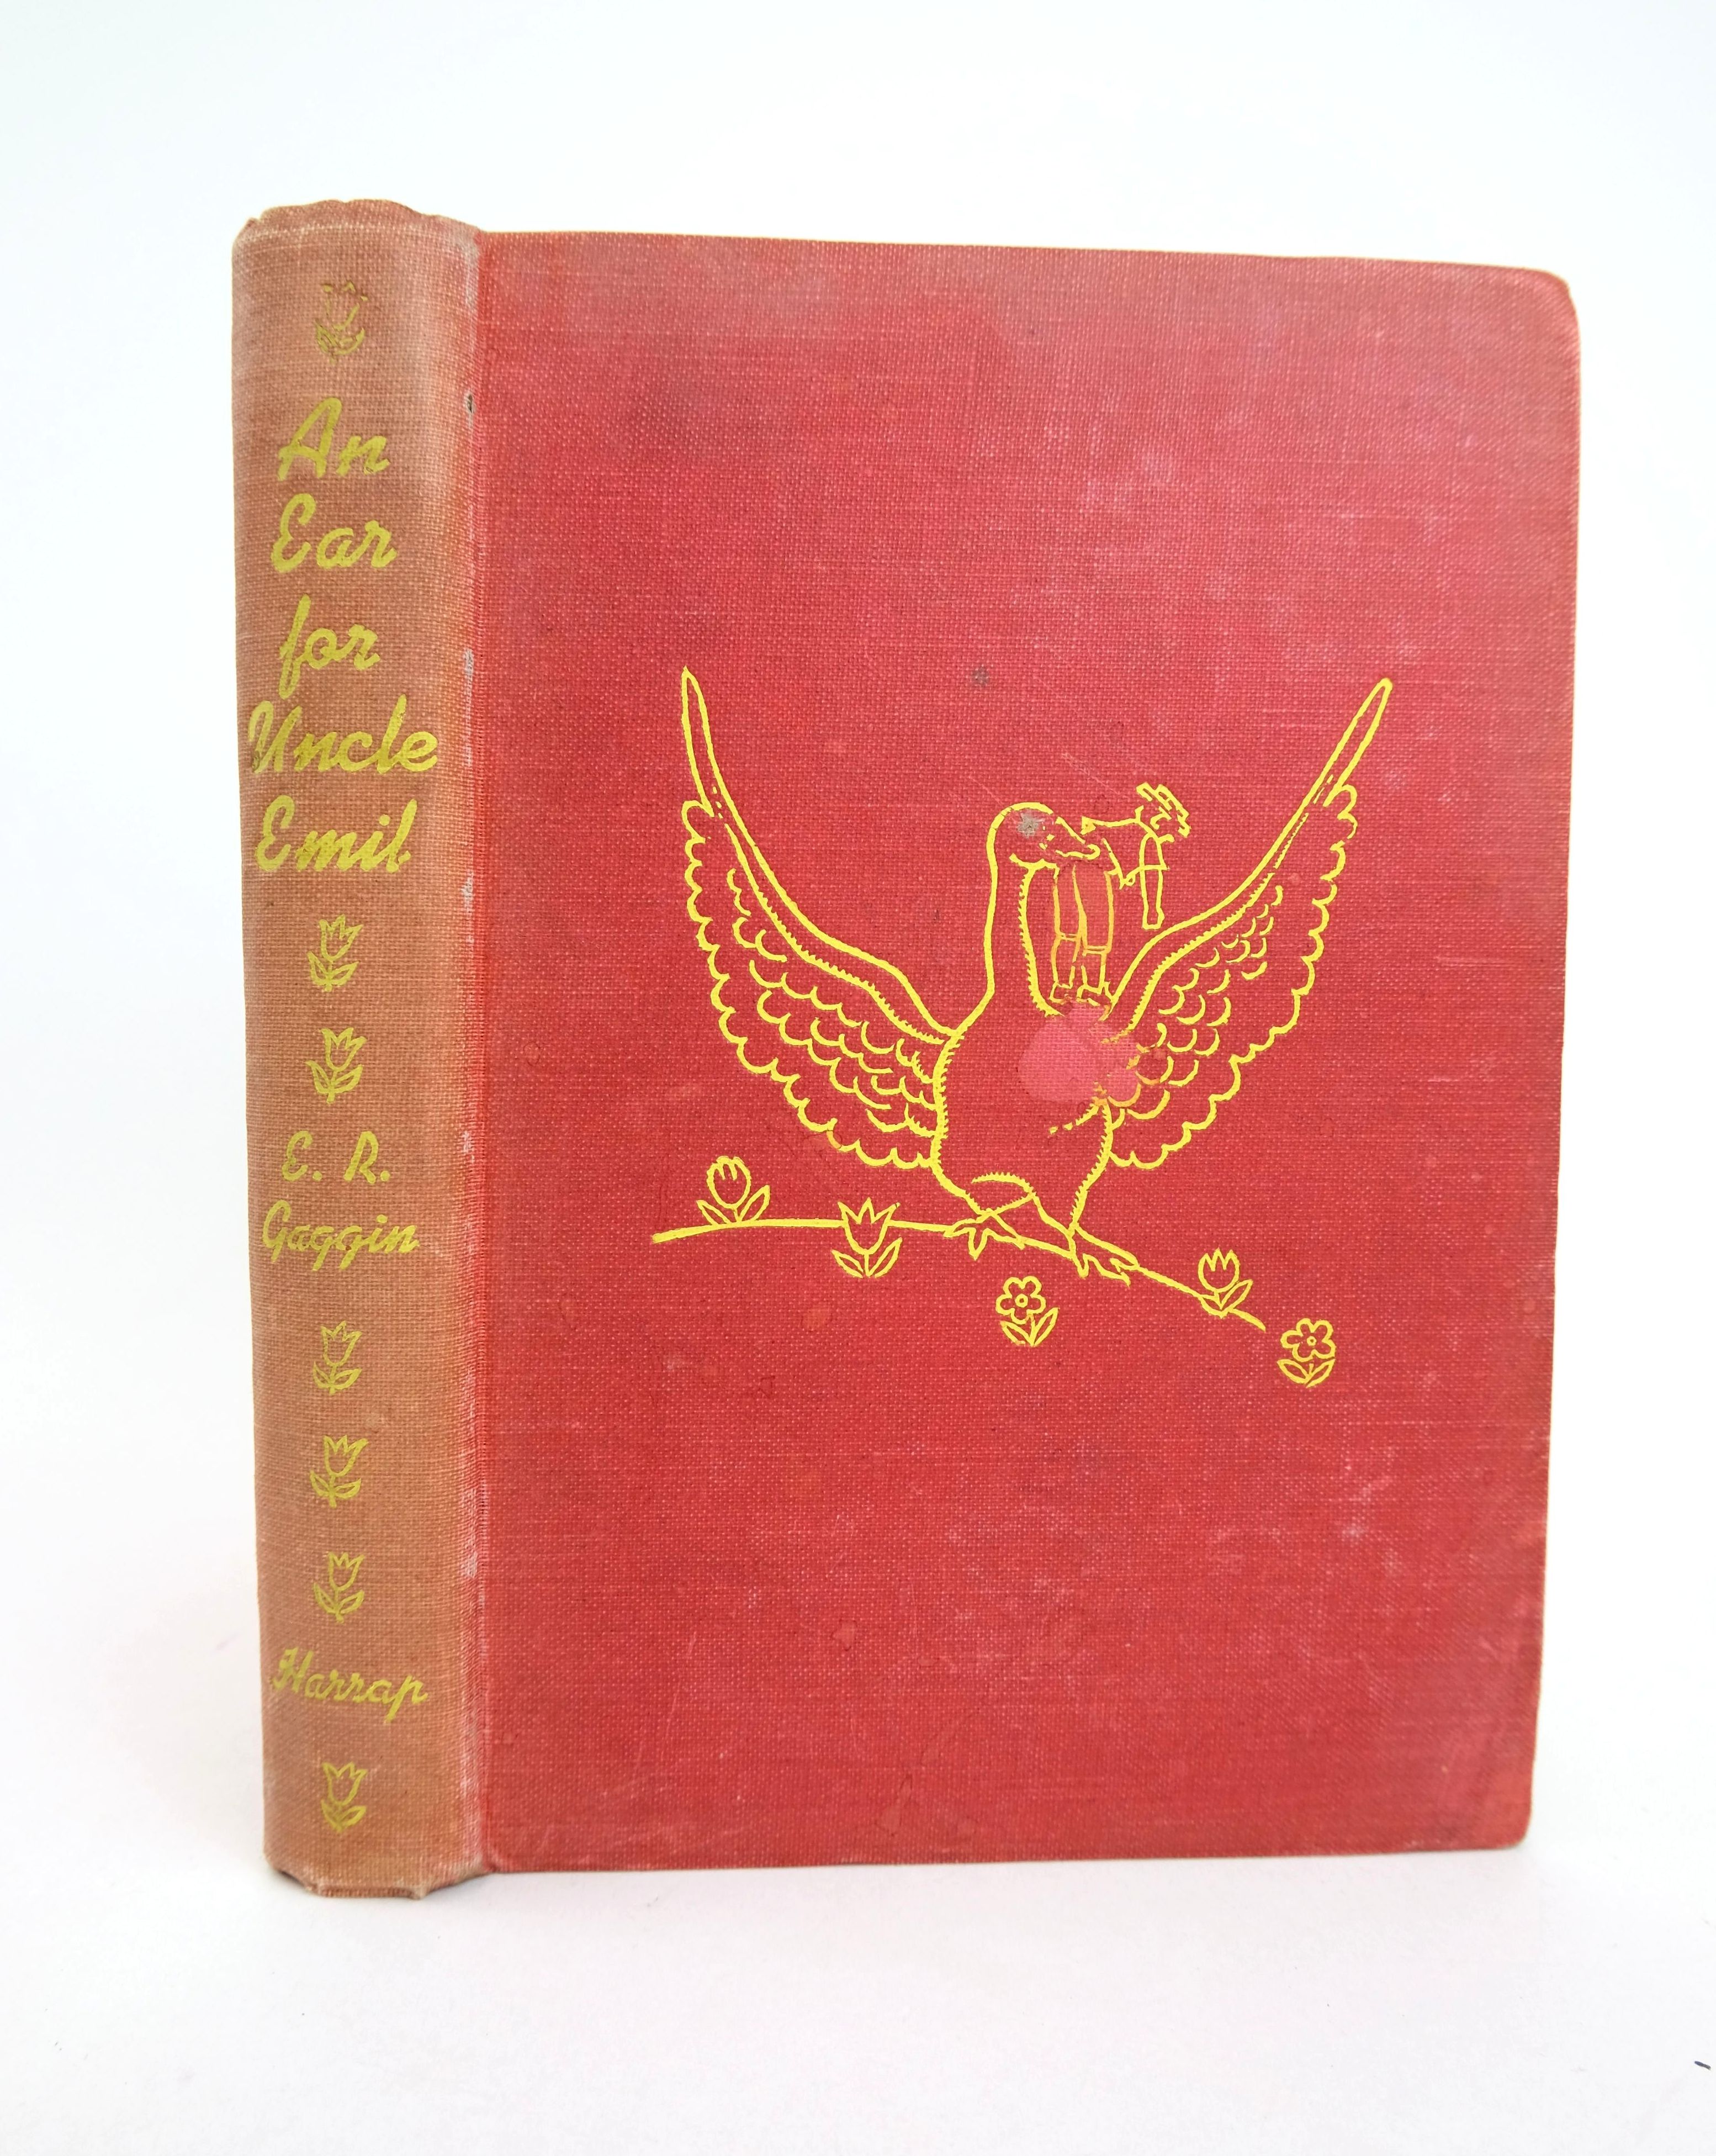 Photo of AN EAR FOR UNCLE EMIL written by Gaggin, E.R. illustrated by Seredy, Kate published by George G. Harrap &amp; Co. Ltd. (STOCK CODE: 1318632)  for sale by Stella & Rose's Books